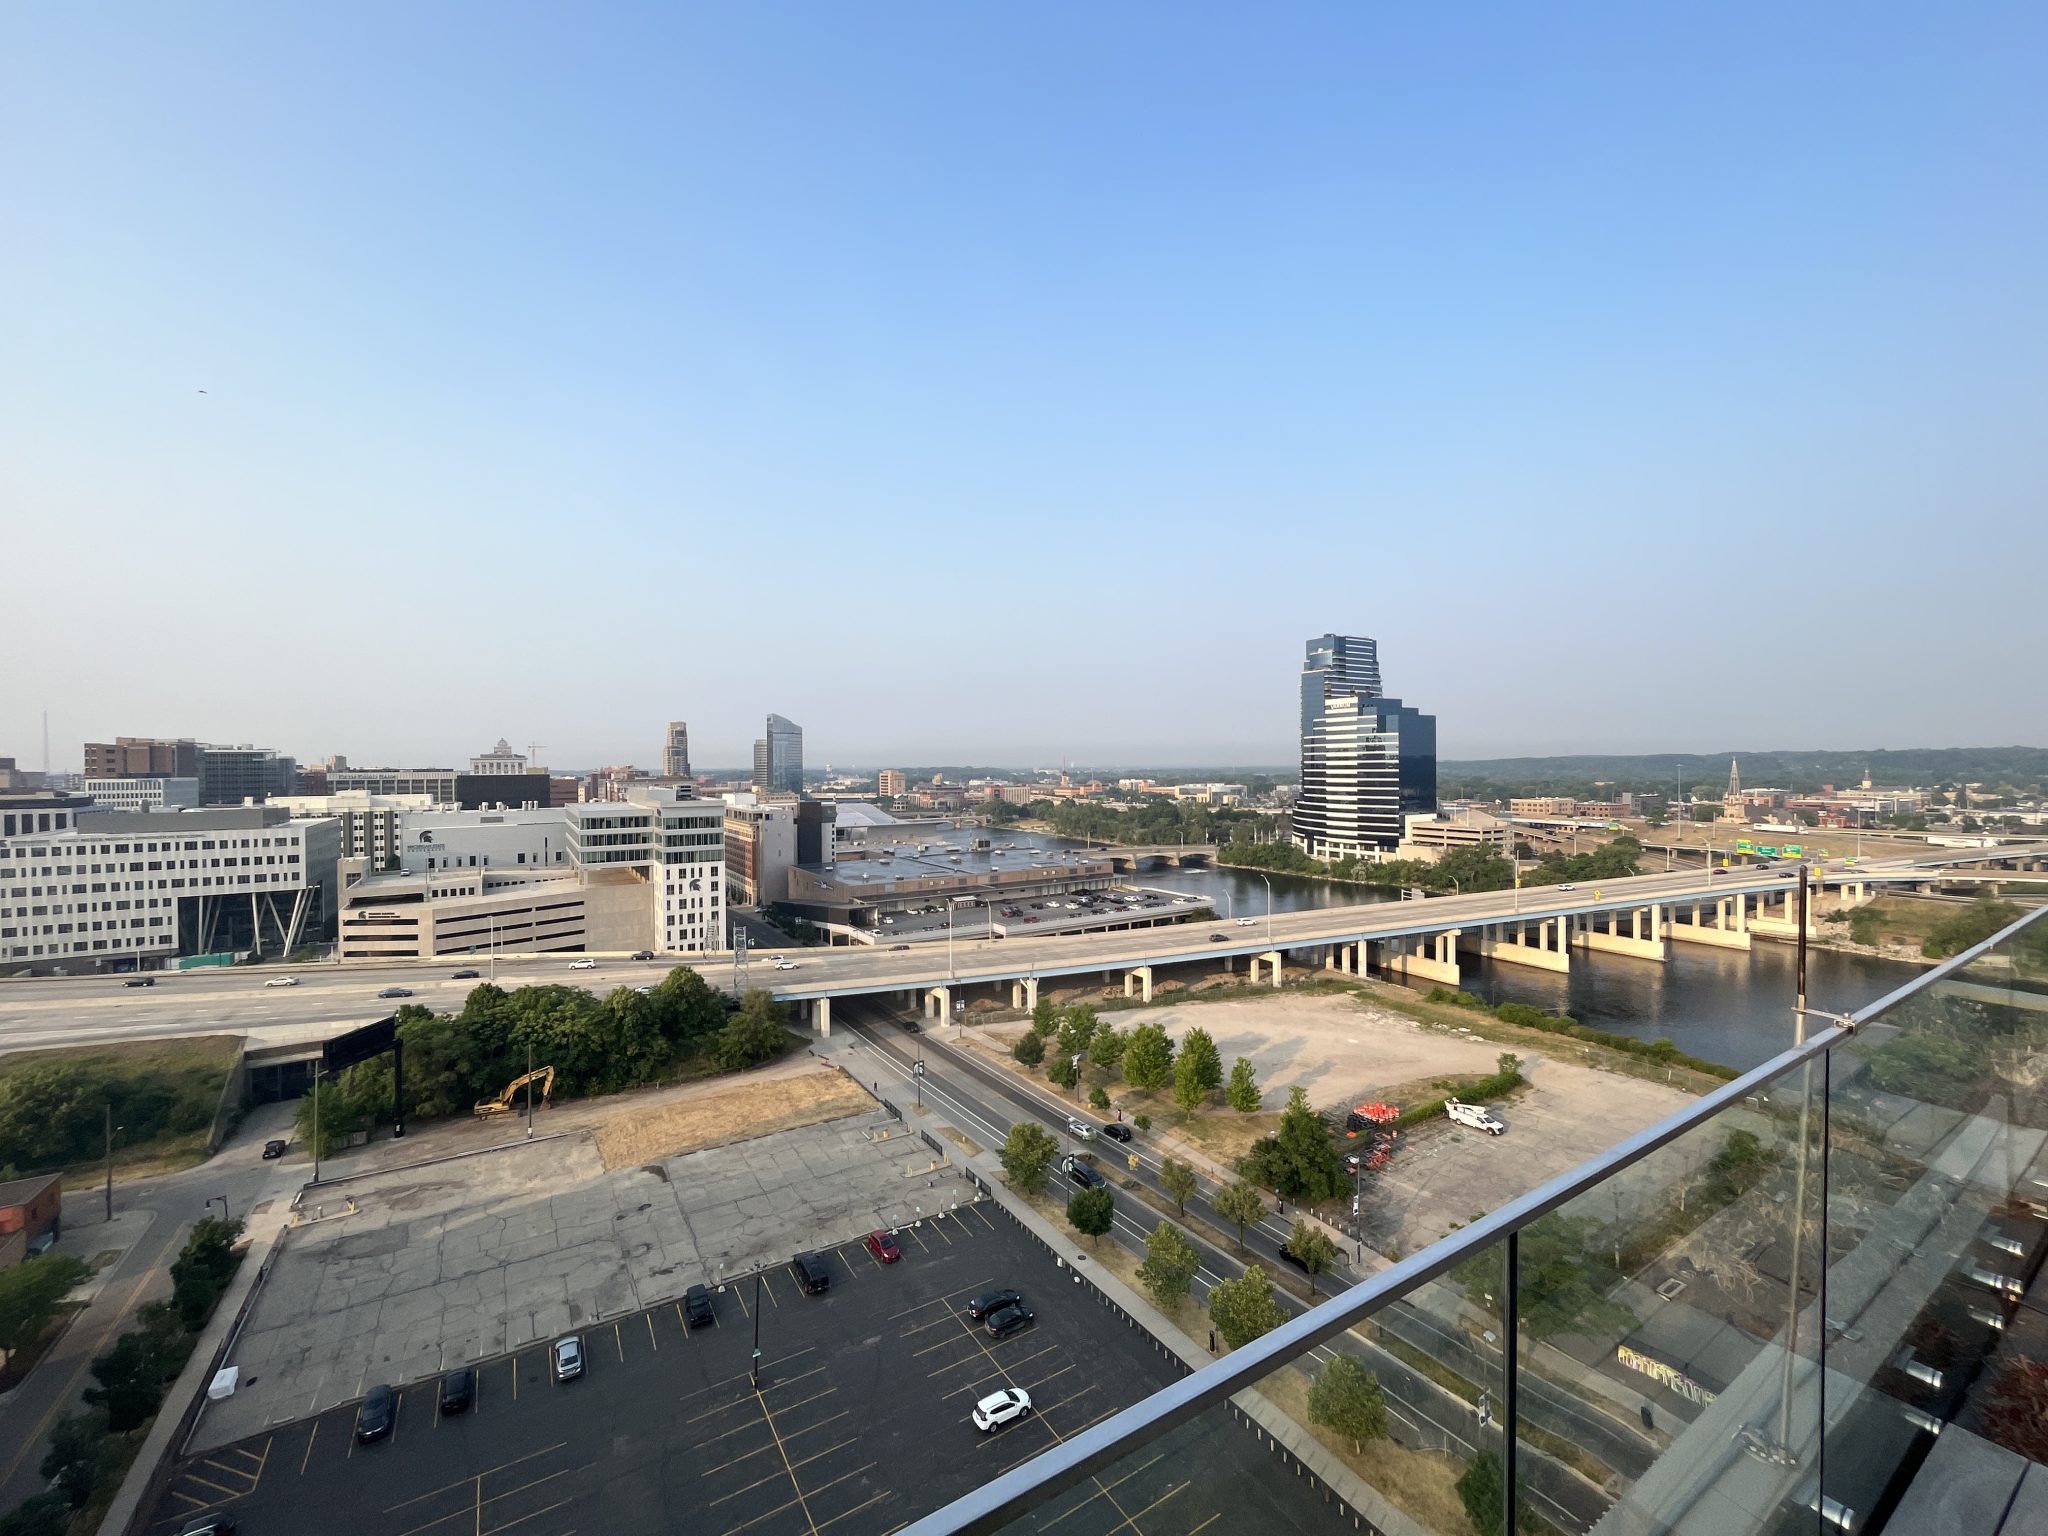 City view of Grand Rapids Michigan in the morning from the 16th floor of a building.